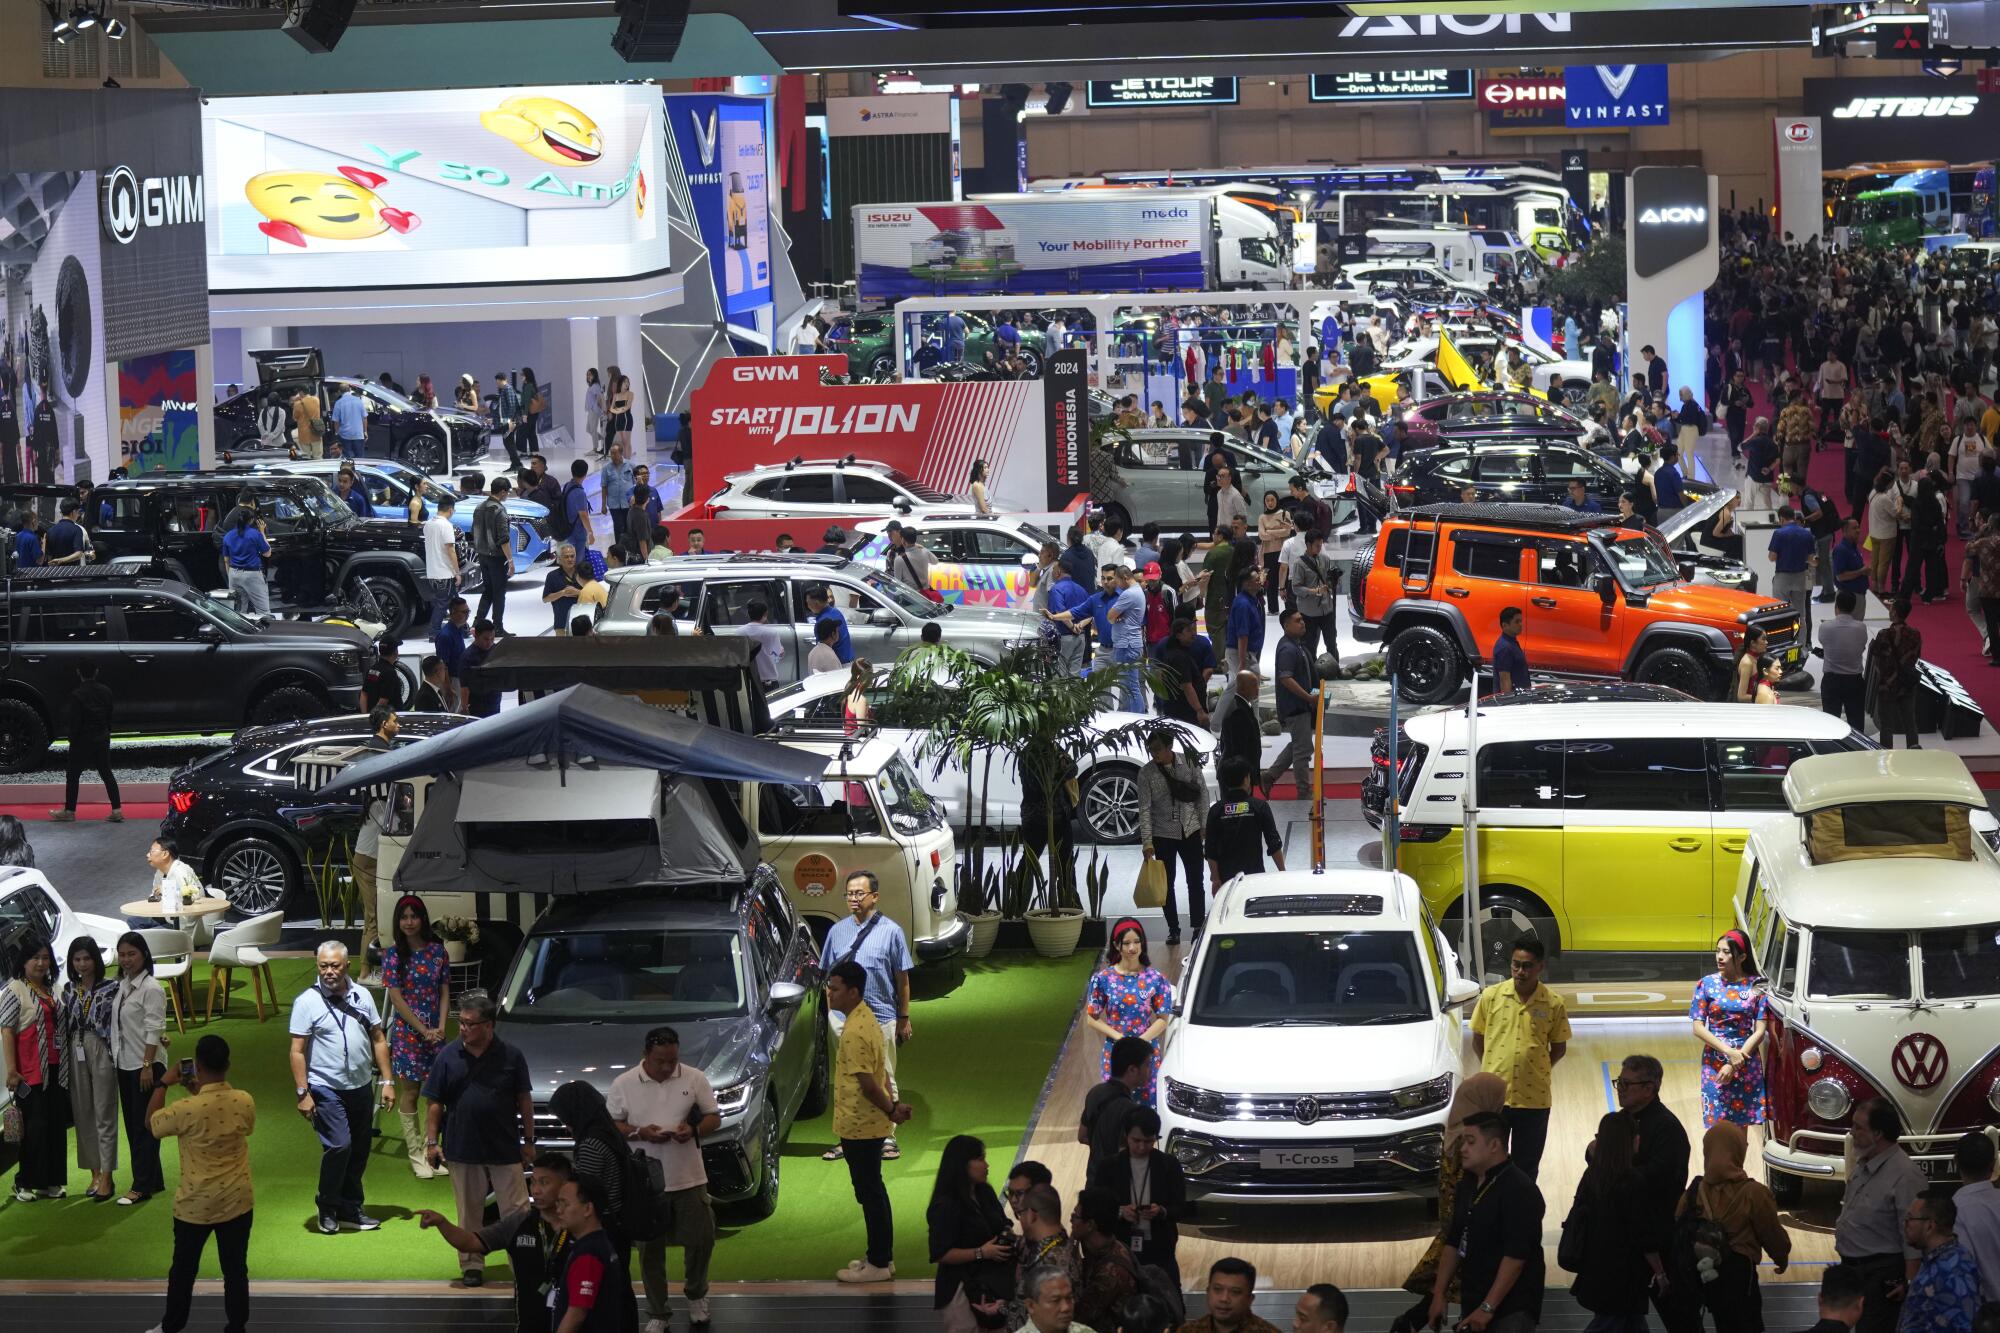 Visitors look at vehicles during an auto show